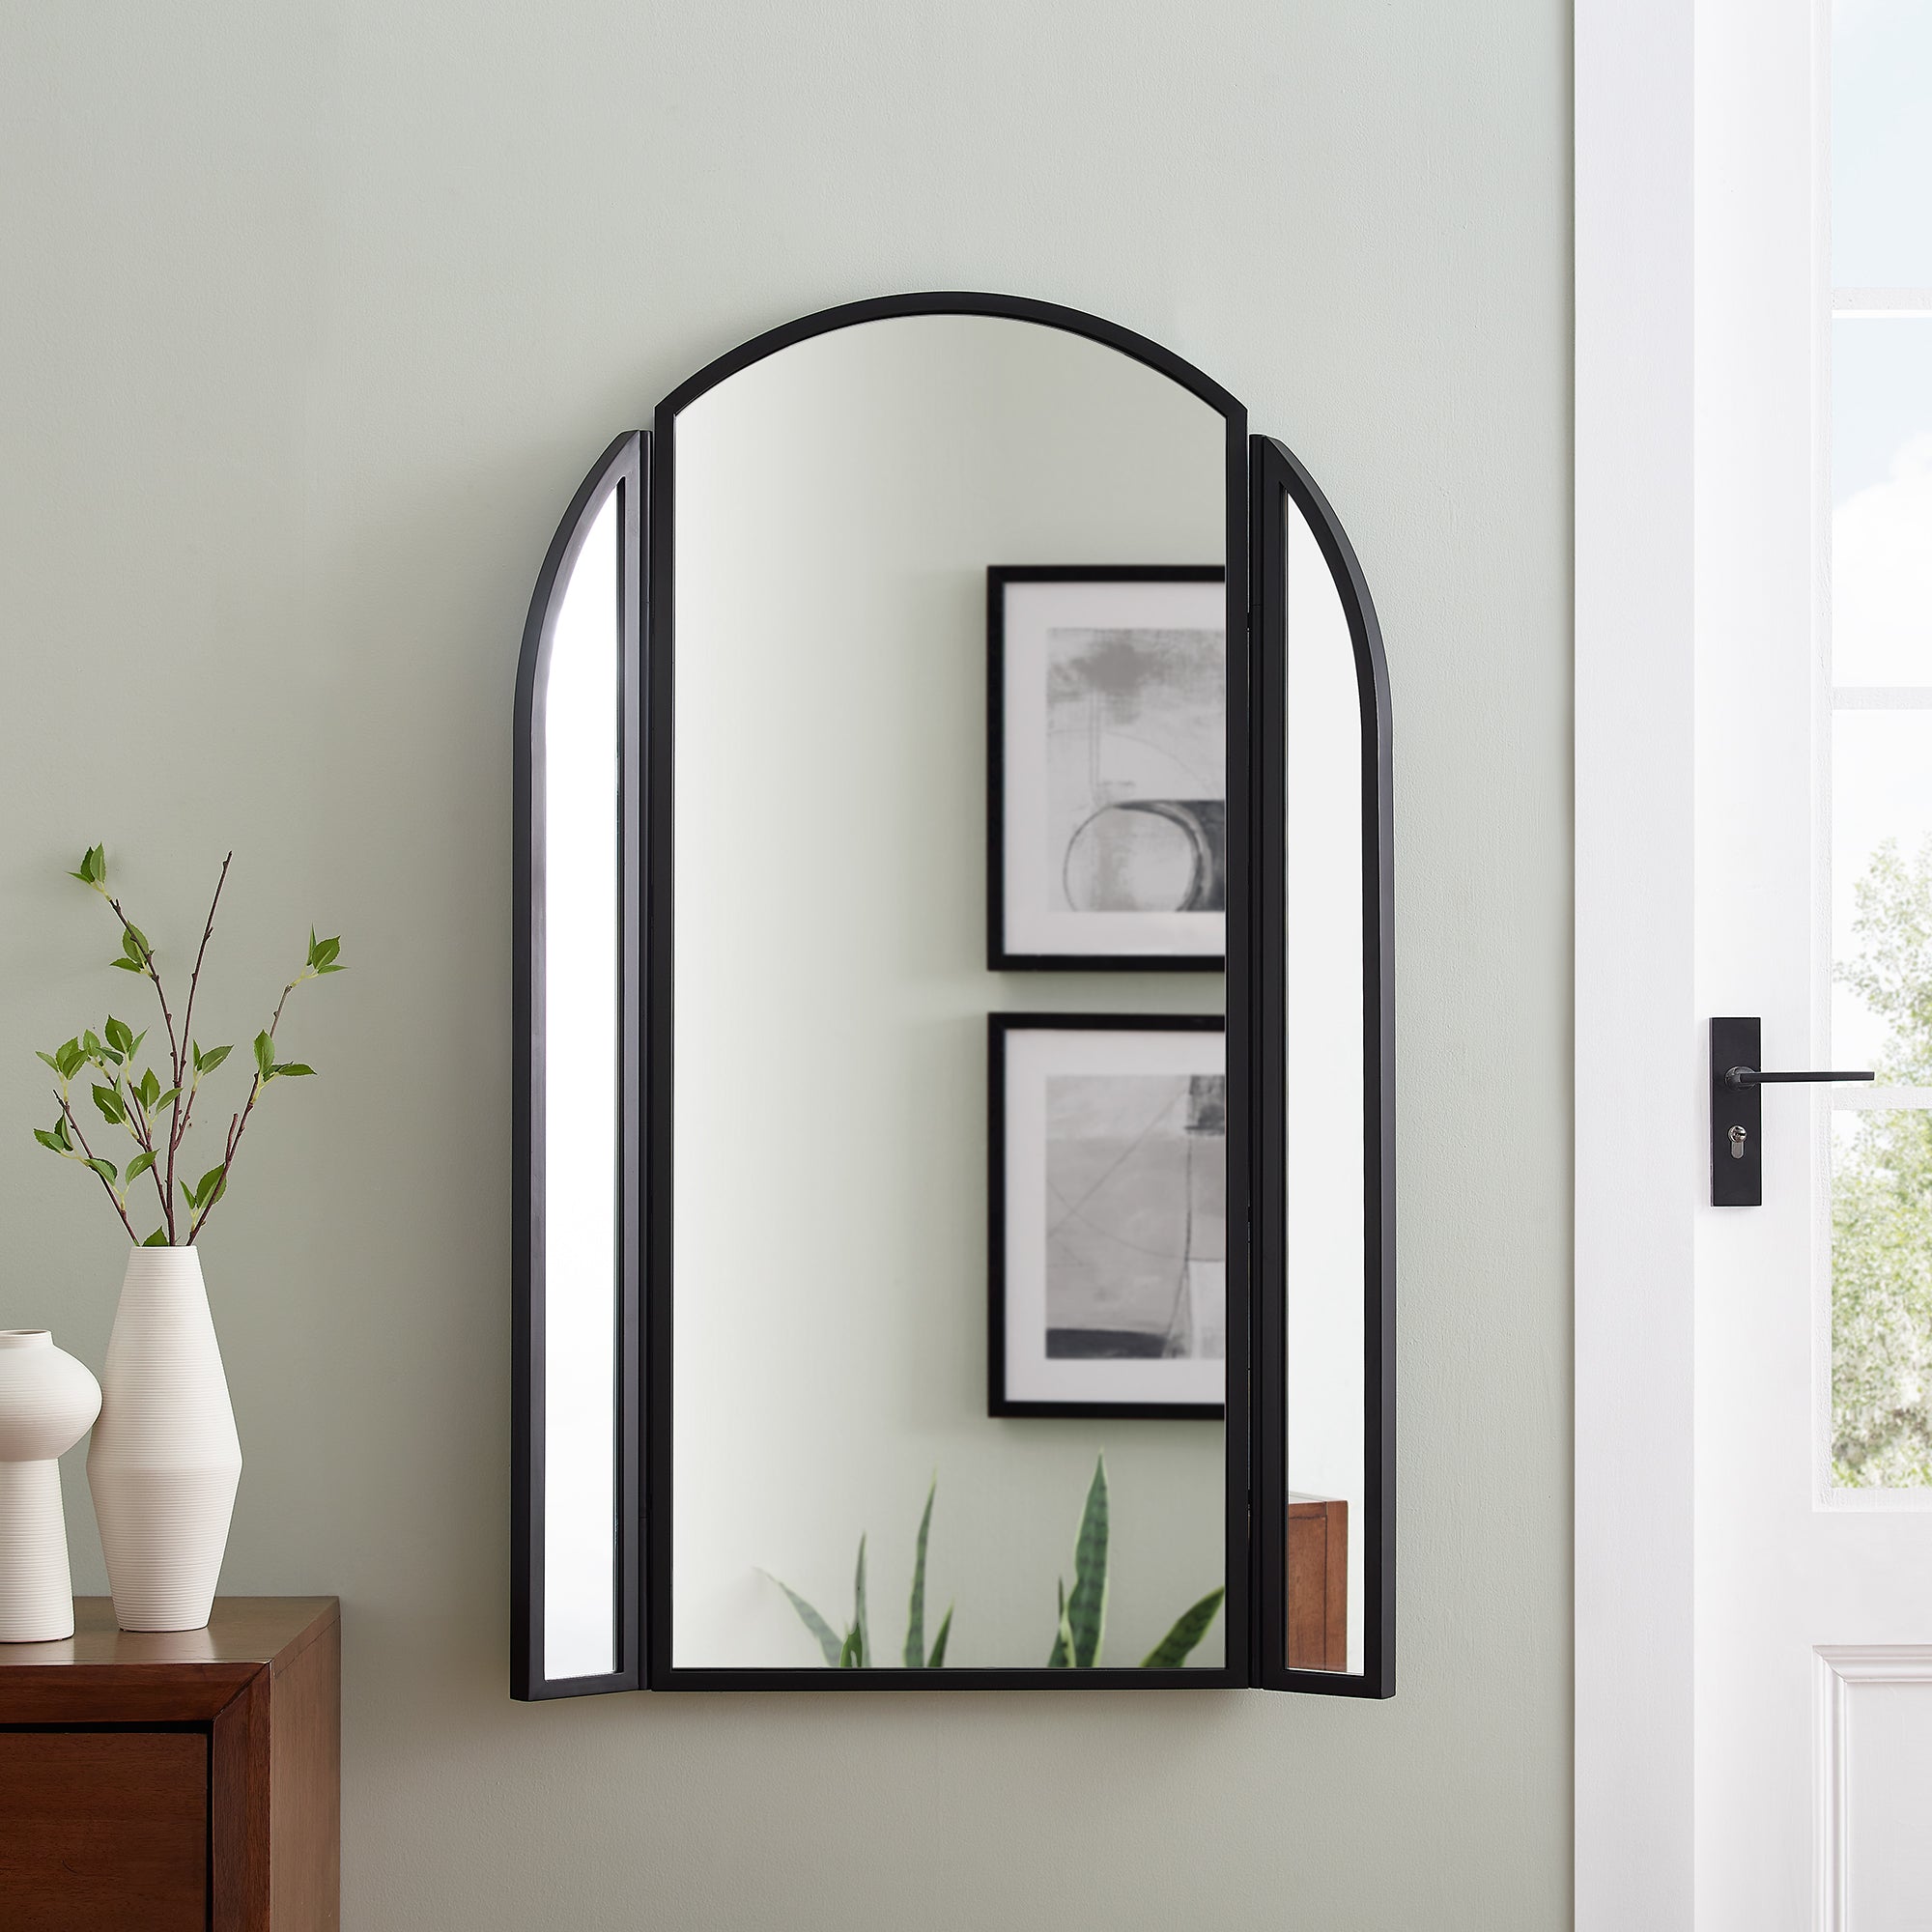 48" Arched Wall Mirror with Hinging Sides